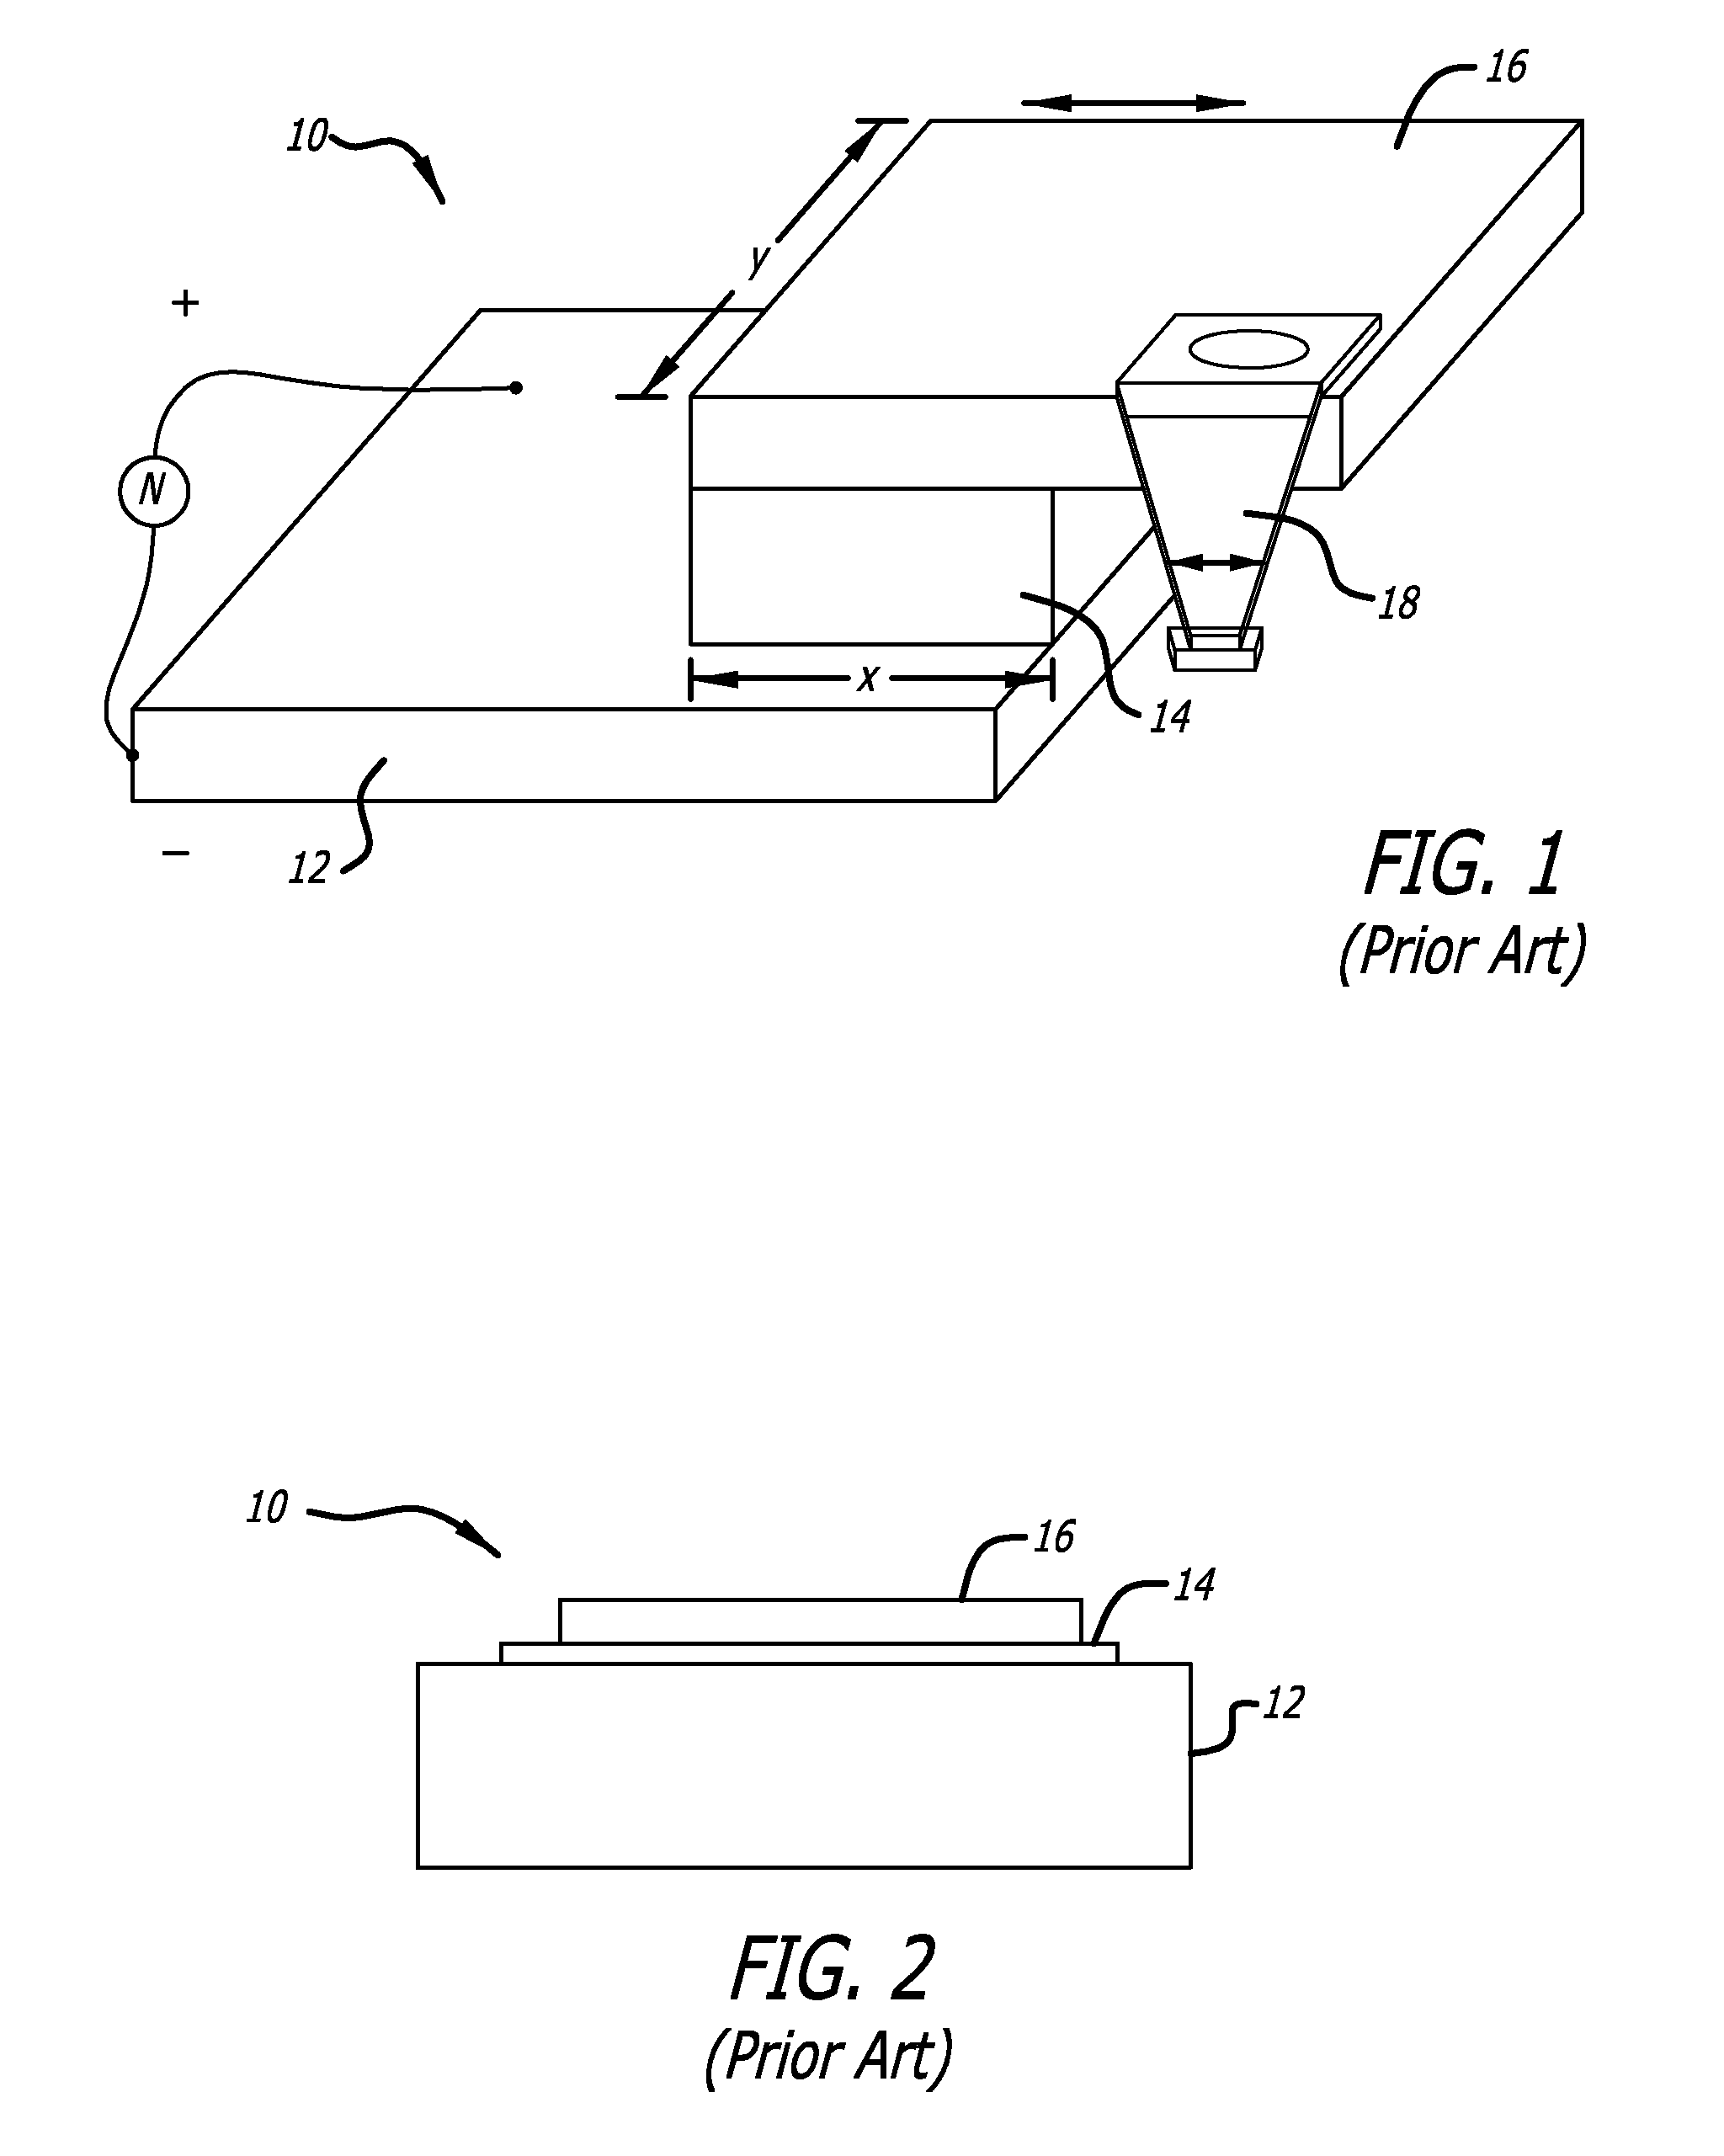 Head gimbal assembly apparatus having an actuator mounted on a mounting plate comprising a ceramic sub-plate formed on a stainless steel mounting plate